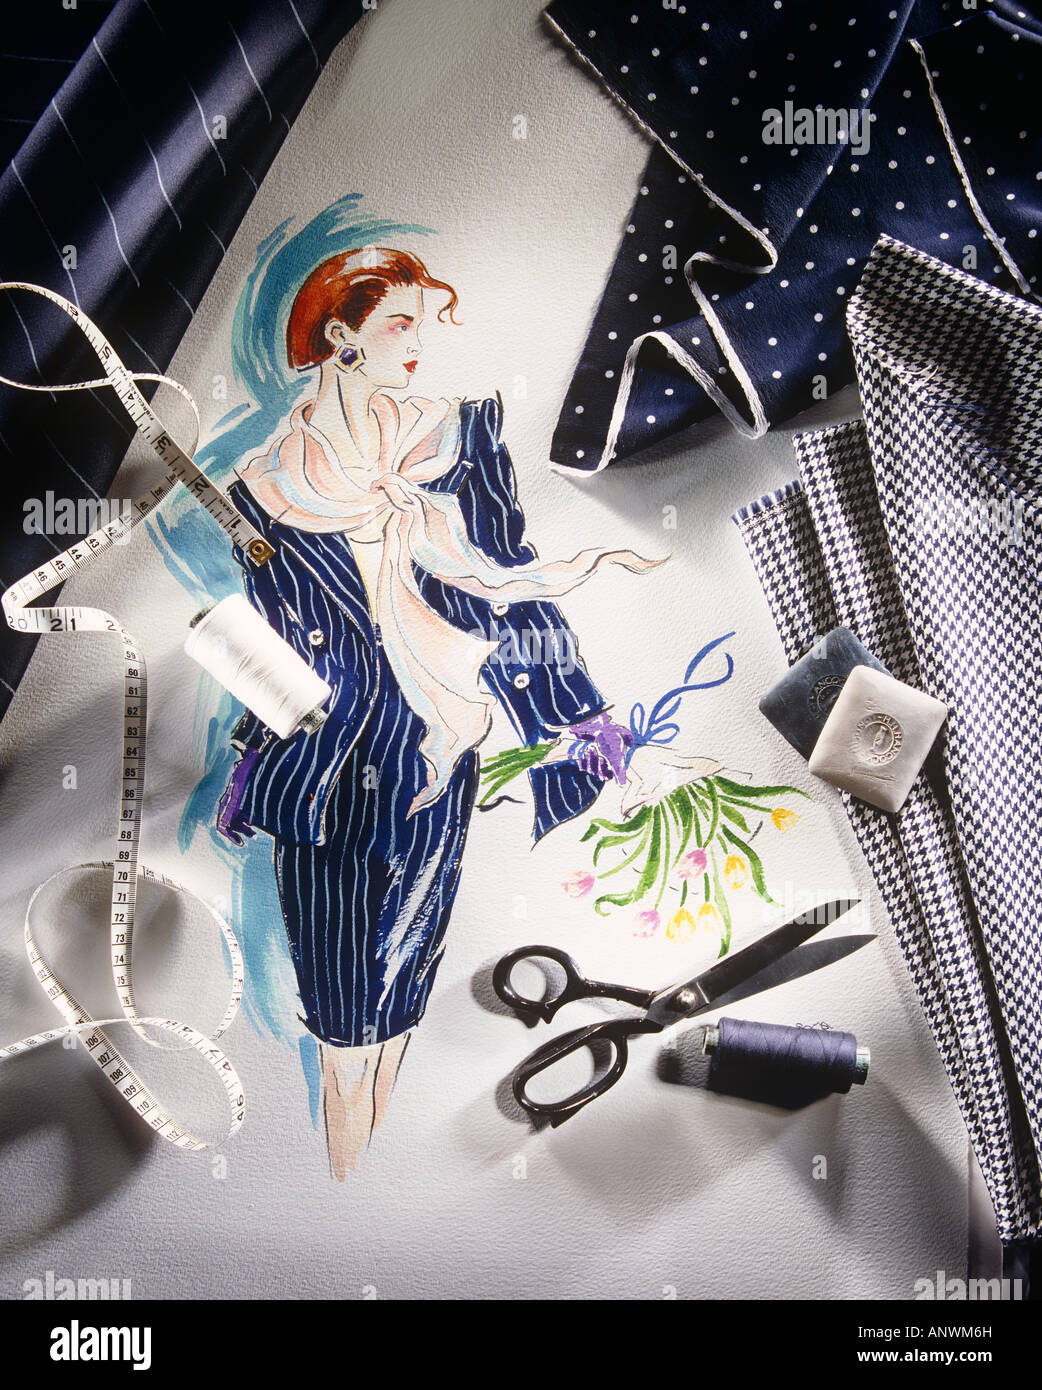 Female Fashion Drawing With Seamstress Materials Stock Photo